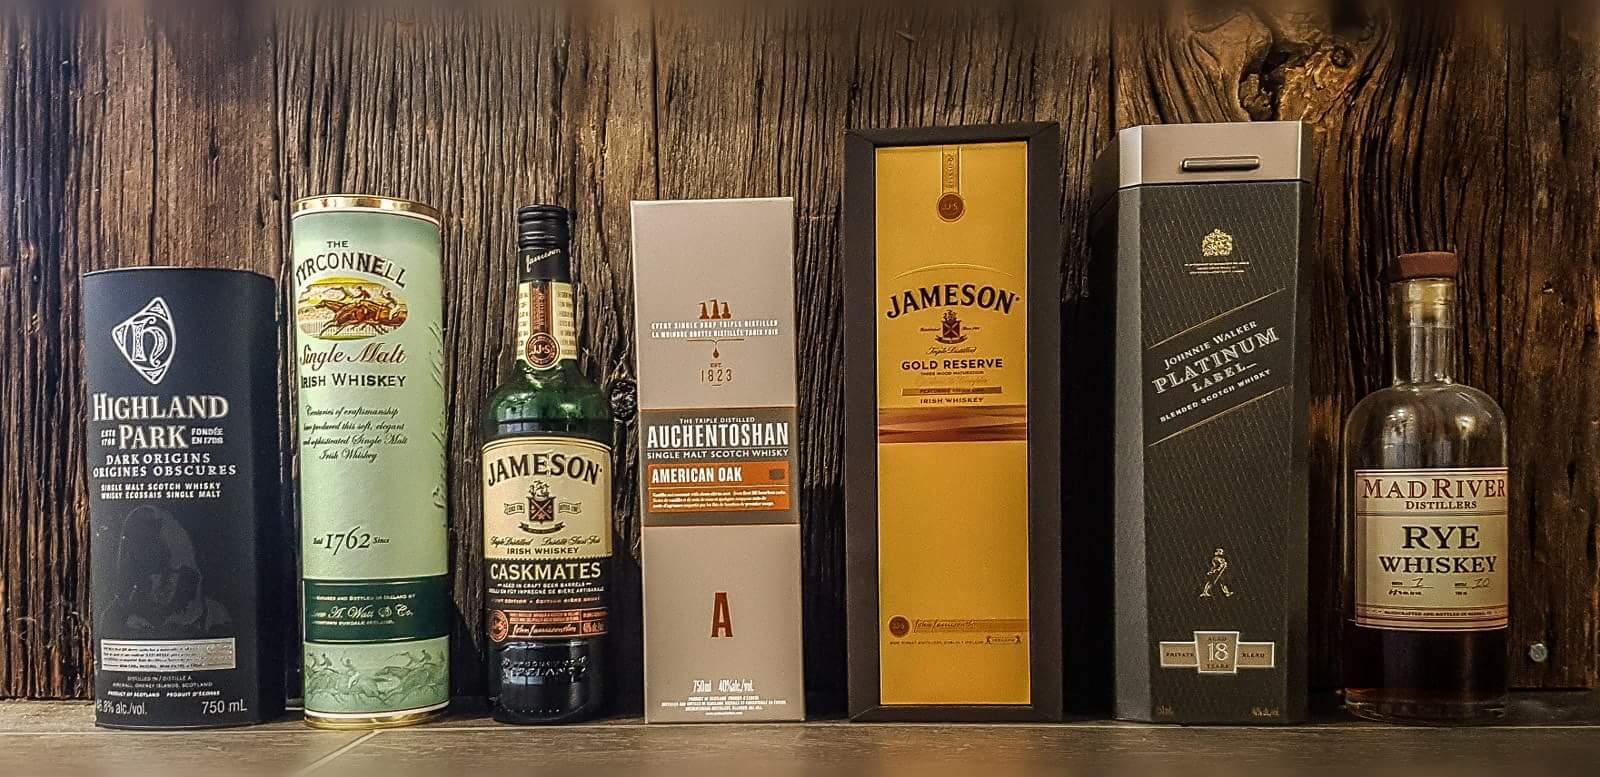 Our Personal Whiskey Collections Image 1